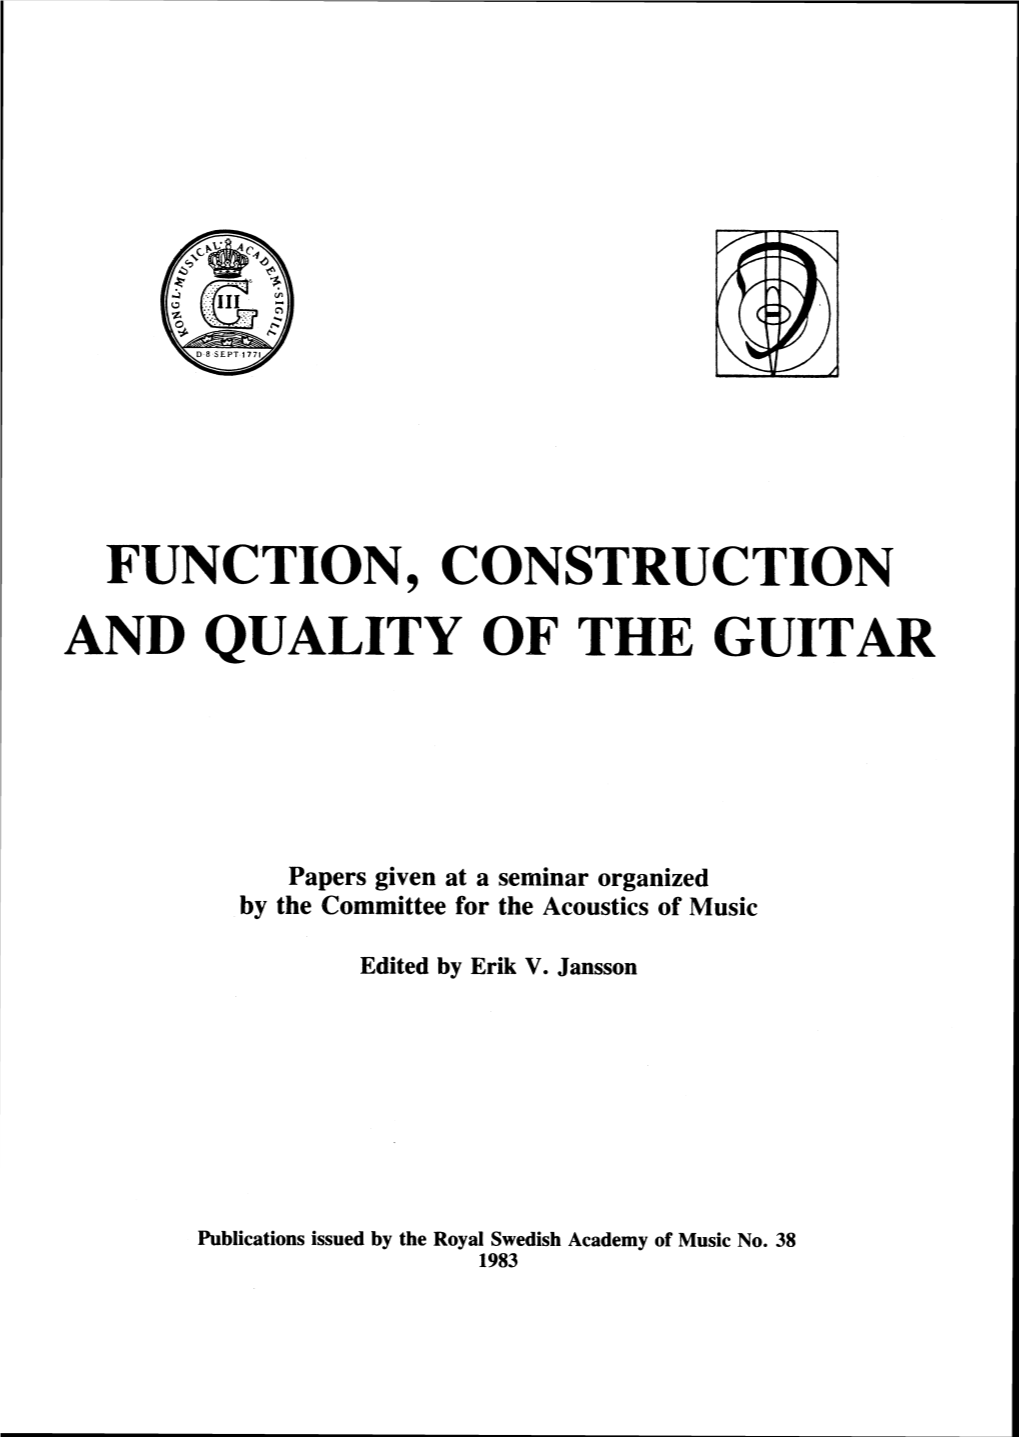 Function, Construction and Quality of the Guitar